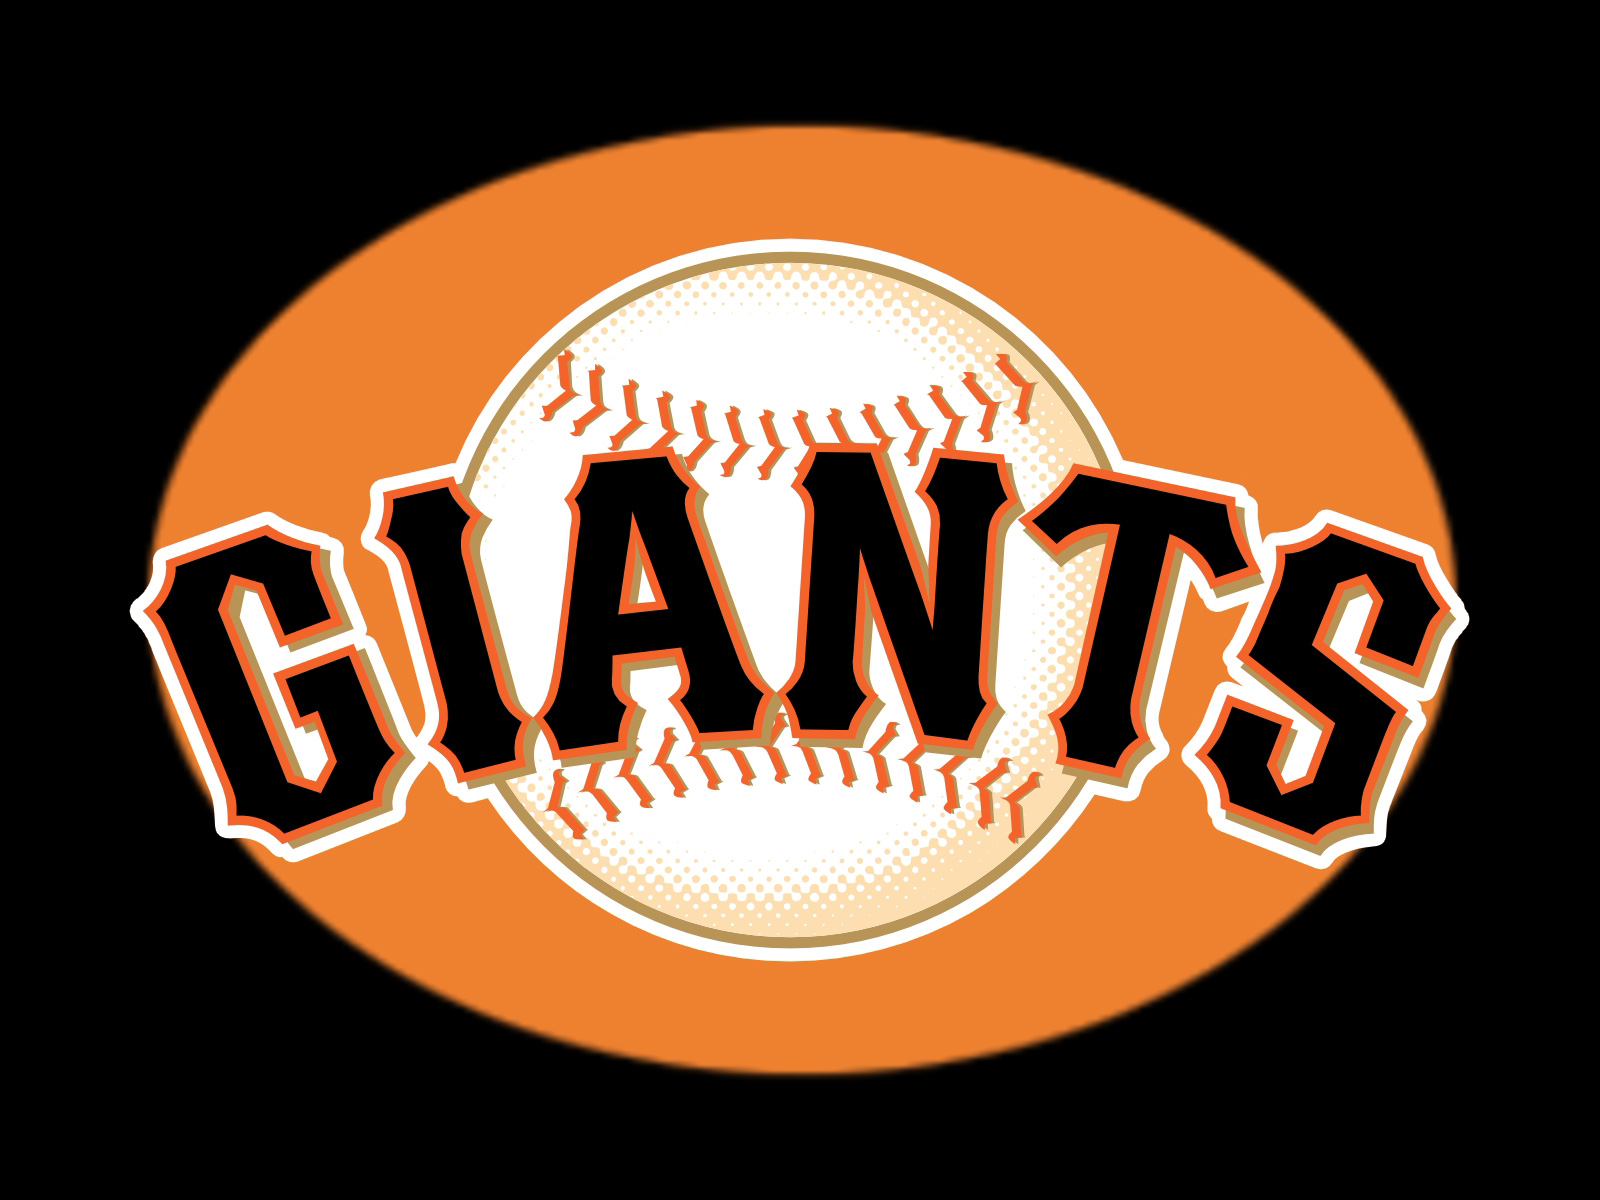 Giants Logo Pictures